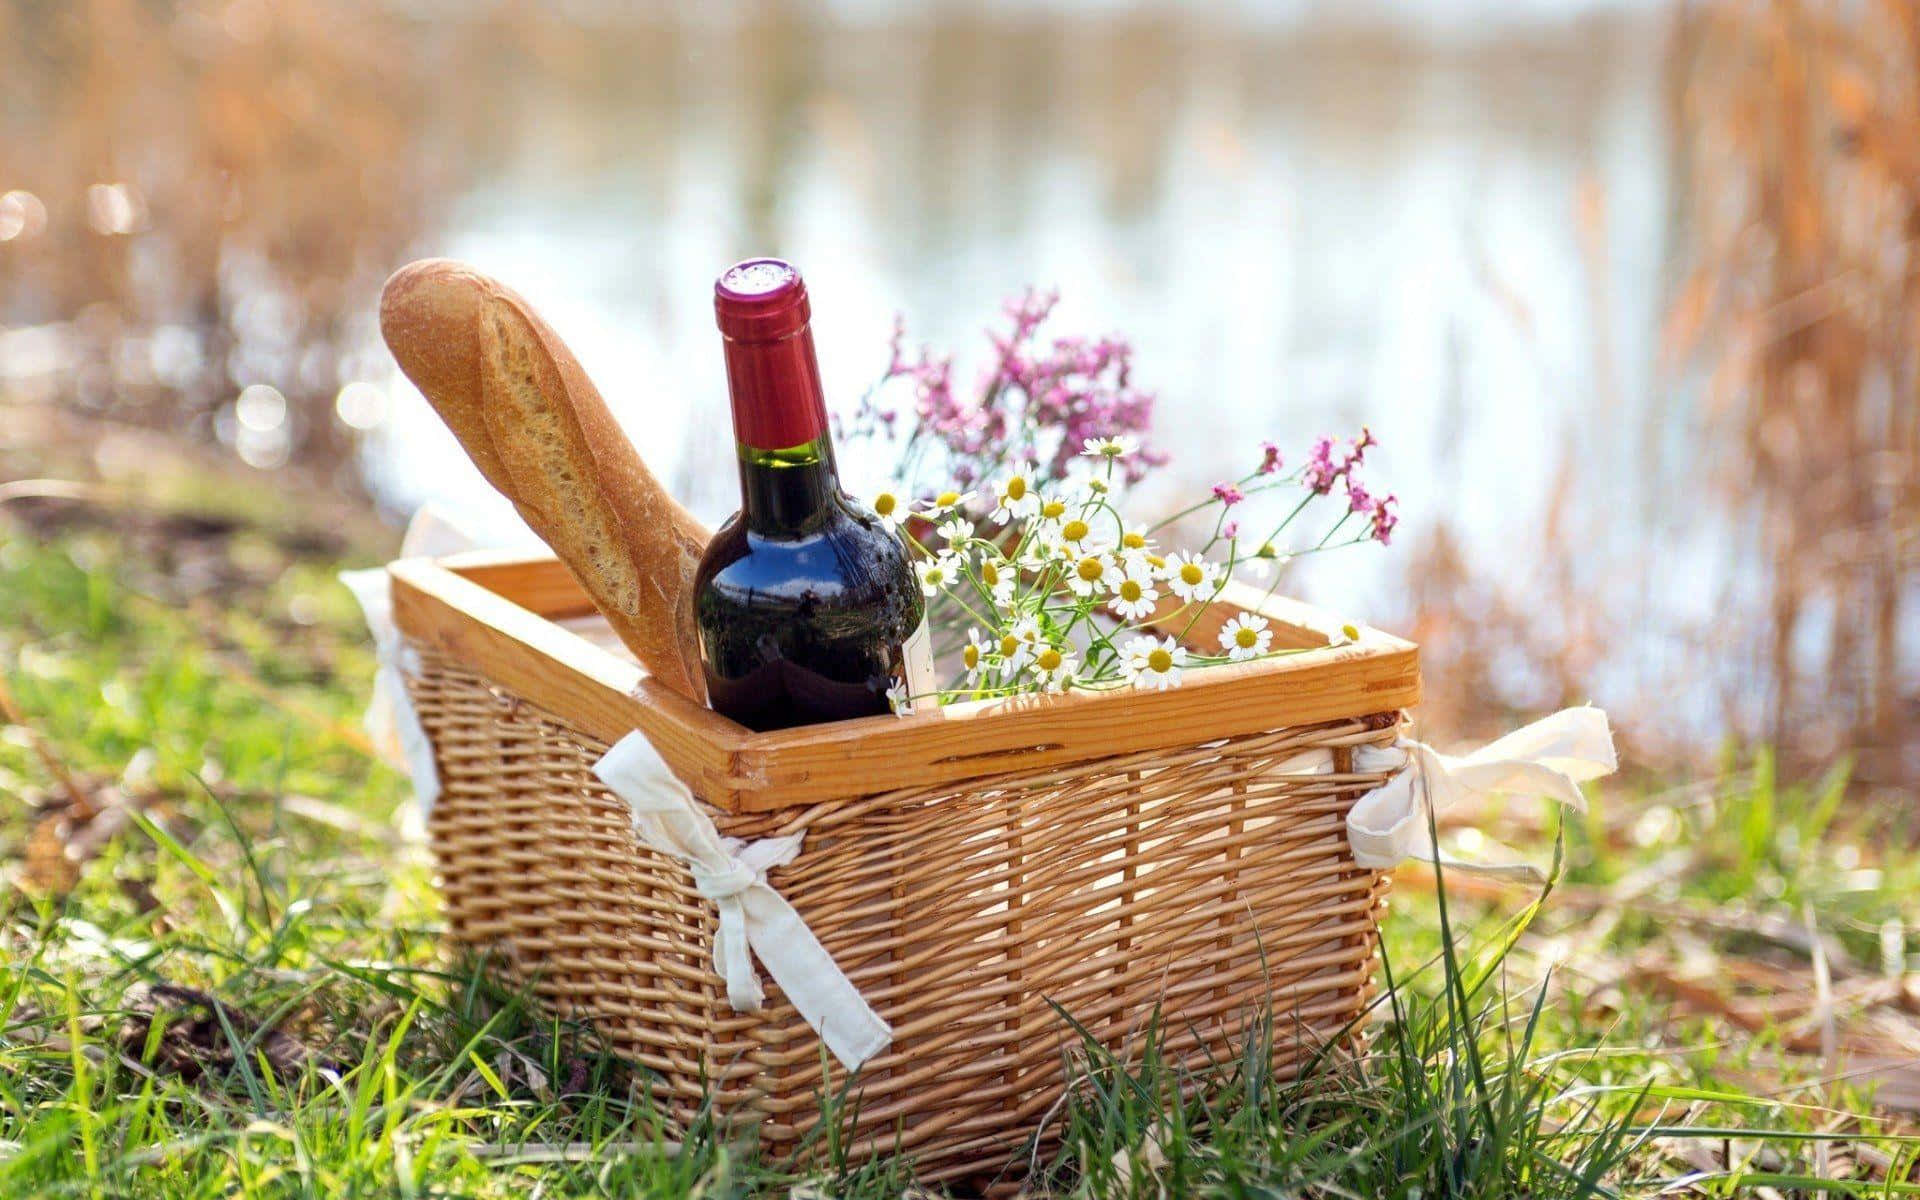 Picnic Basket With Wine Picture